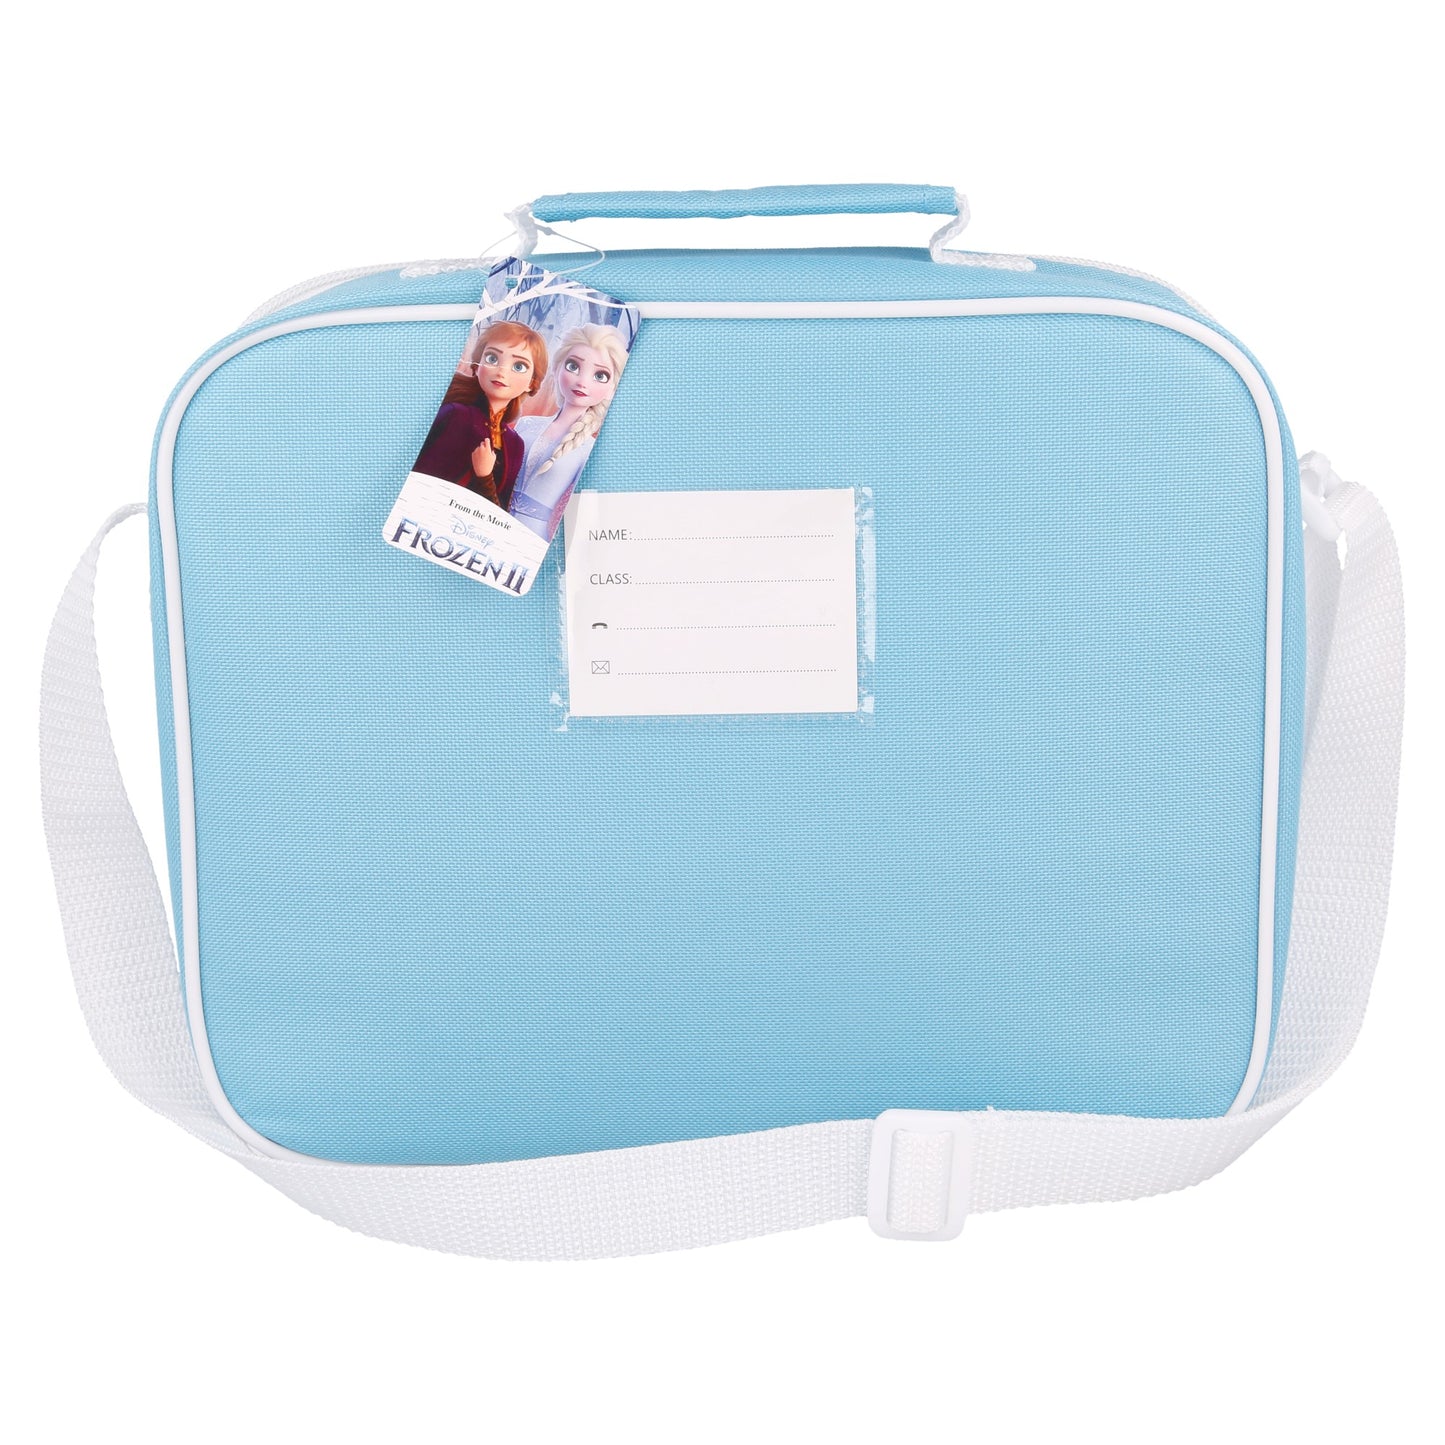 Stor - Insulated Lunch Bag, With Strap | FROZEN II BLUE FOREST